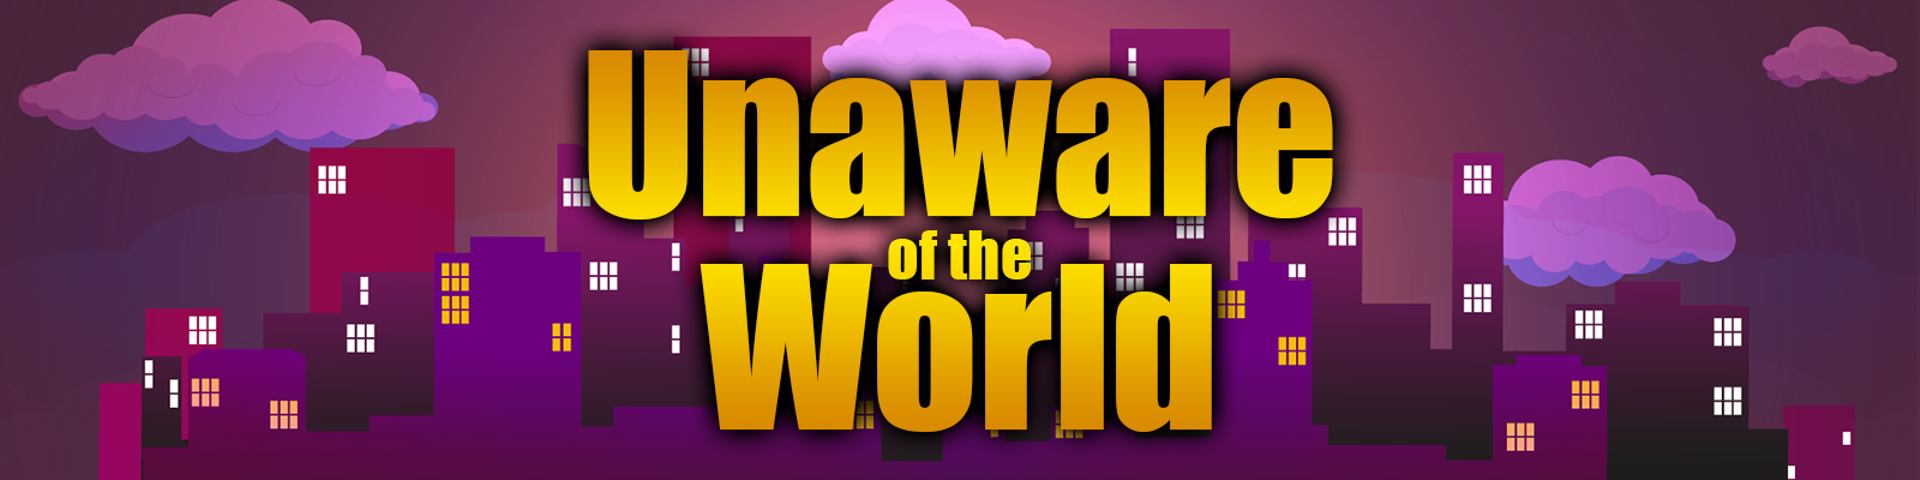 Unaware Of The World  v0.24d Basic by Unaware Team Win64/Win32/Mac/Linux/Android